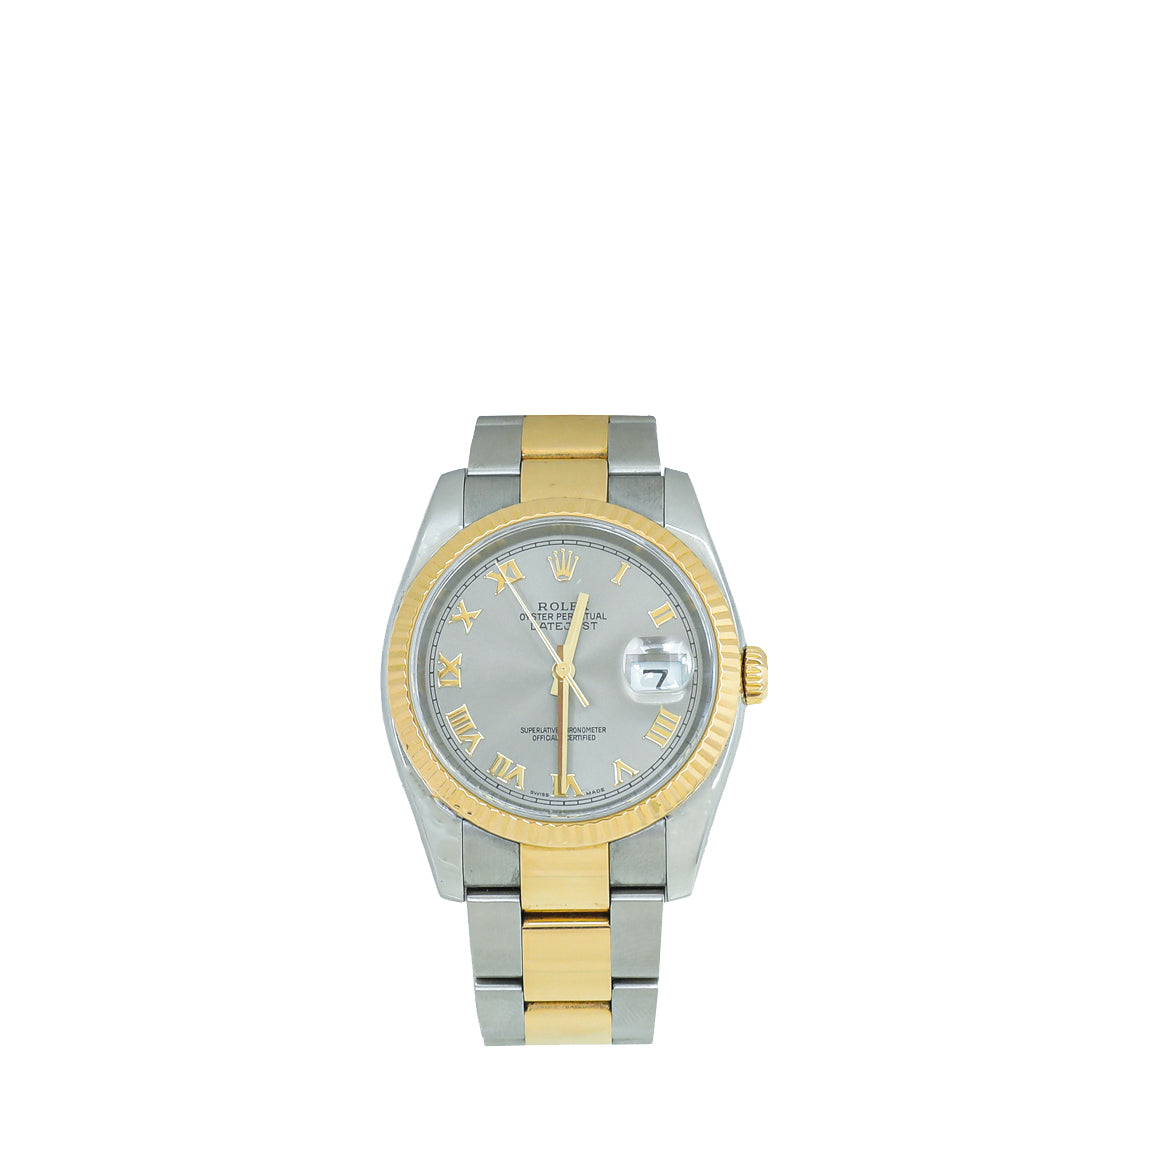 Rolex Oyster Yellow Gold Perpetual Datejust Roman numerals 36mm Watch